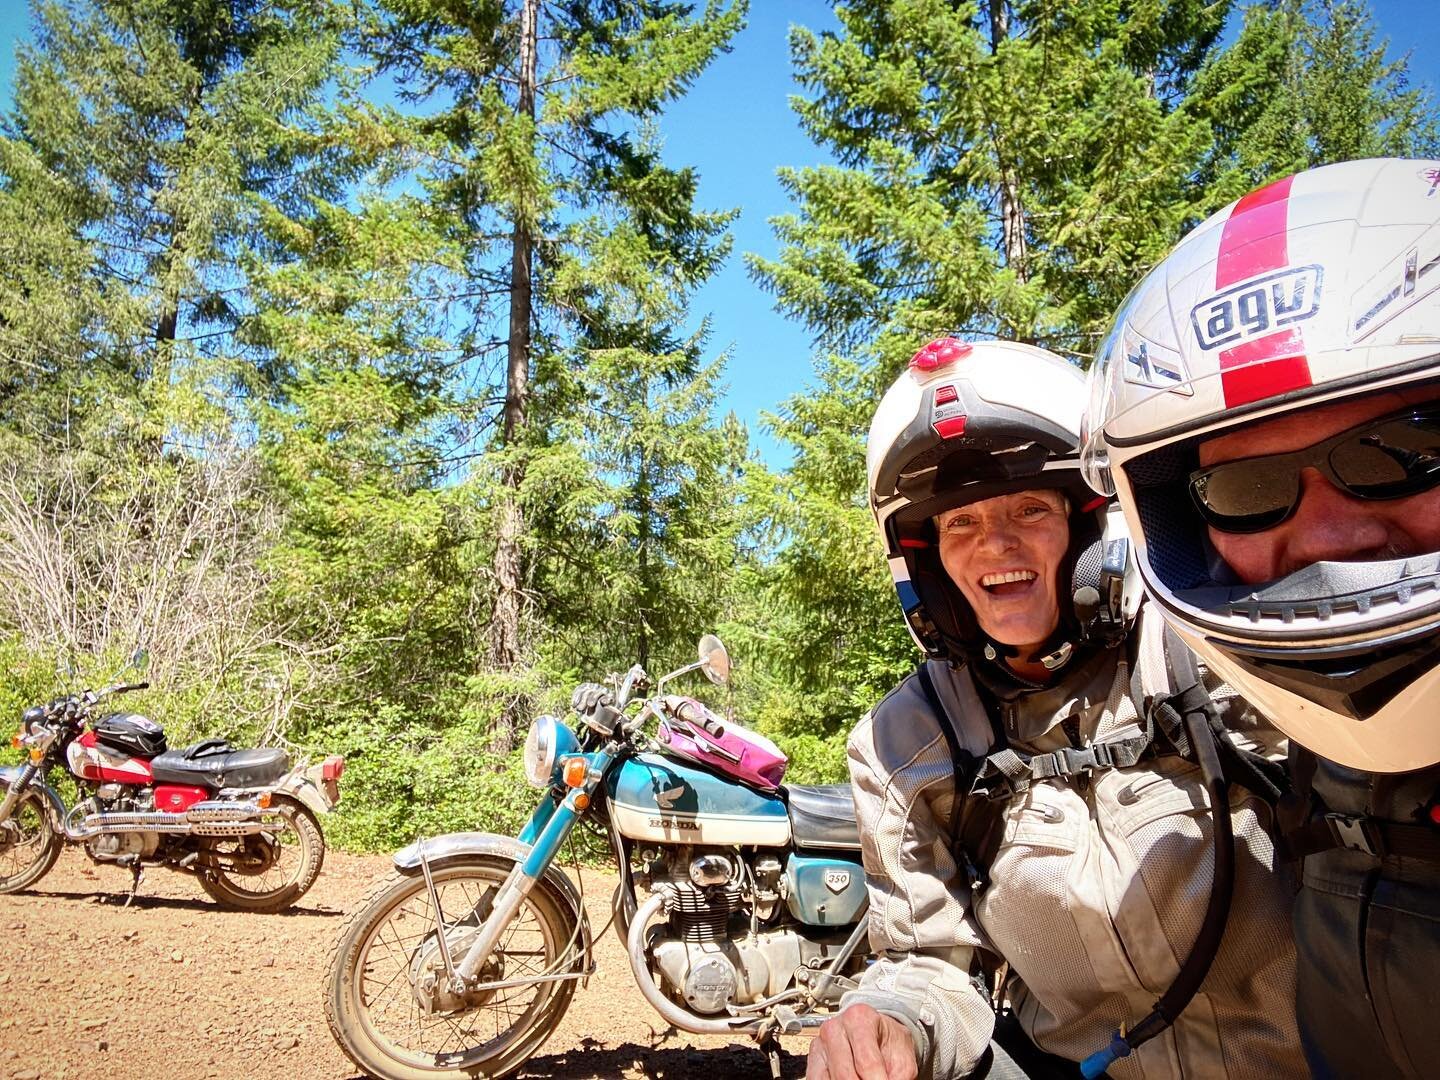 This was one of my most epic rides, getting off course in Ashland Oregon on the @southernoregontt with an ultimate riding partner, Hilary Davis. We rode over 30 miles in dirt, reached the &ldquo;grizzly flat&rdquo; summit, and finally ran into a look